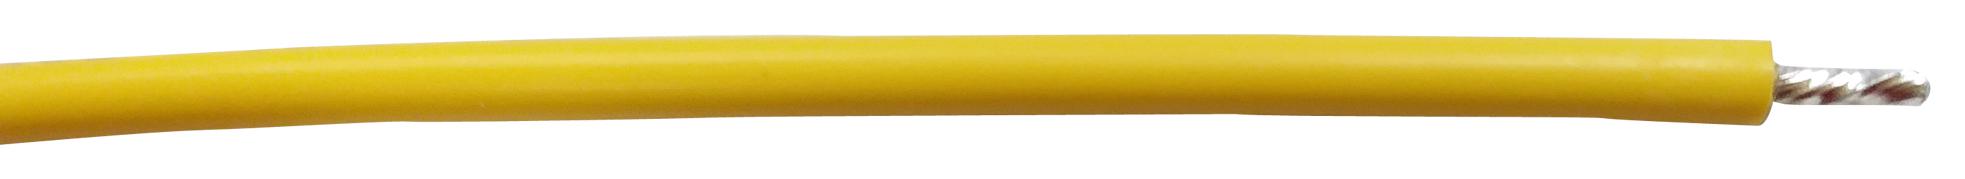 PRO POWER Single Wire PP002332 HOOK-UP WIRE, 26AWG, YELLOW, 305M, 300V PRO POWER 2919491 PP002332